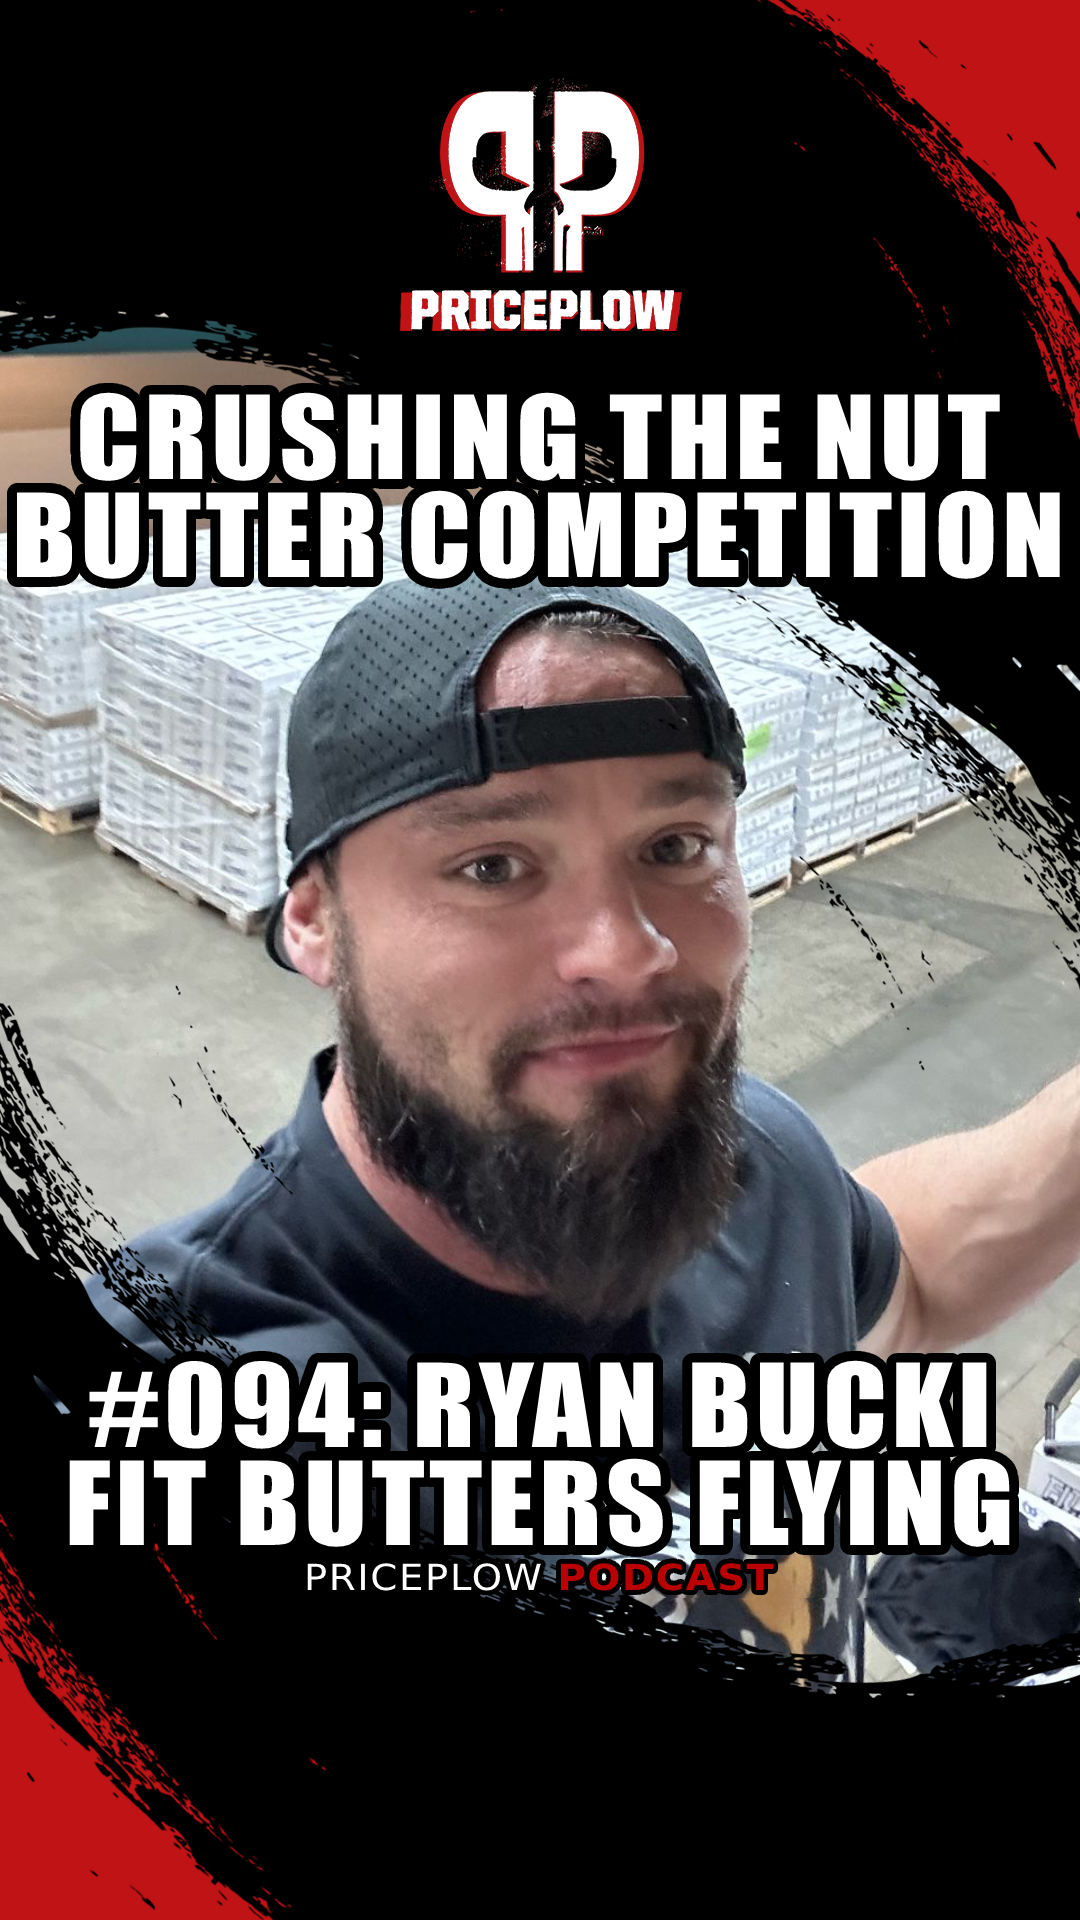 Ryan Bucki - Fit Butters and Fitness Informant